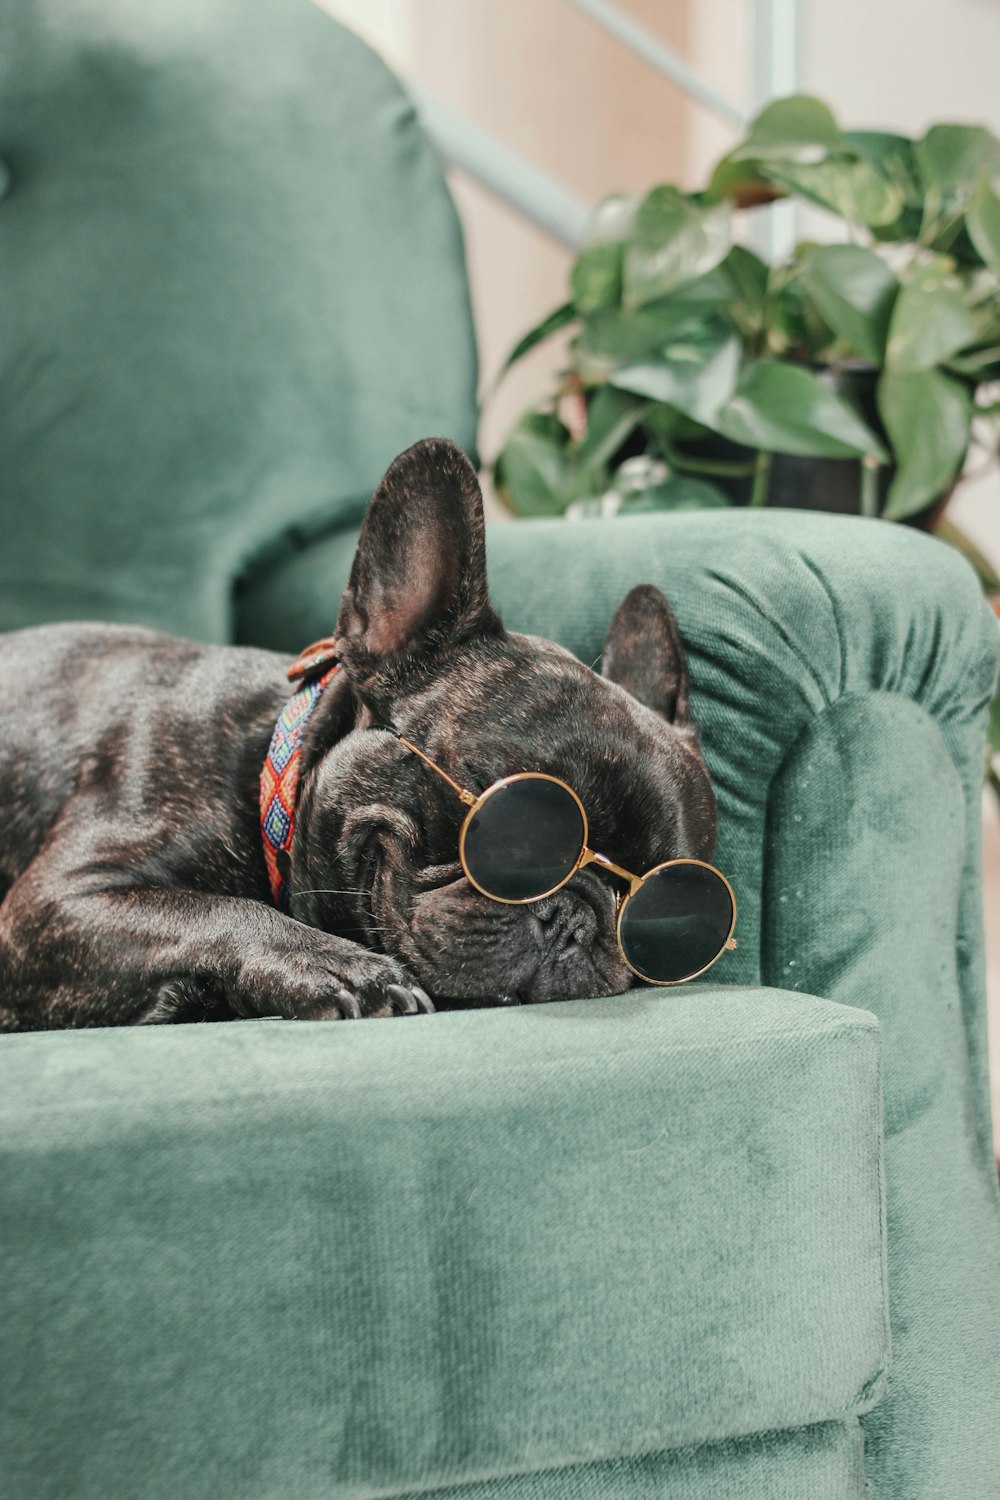 a dog wearing sunglasses laying on a green chair